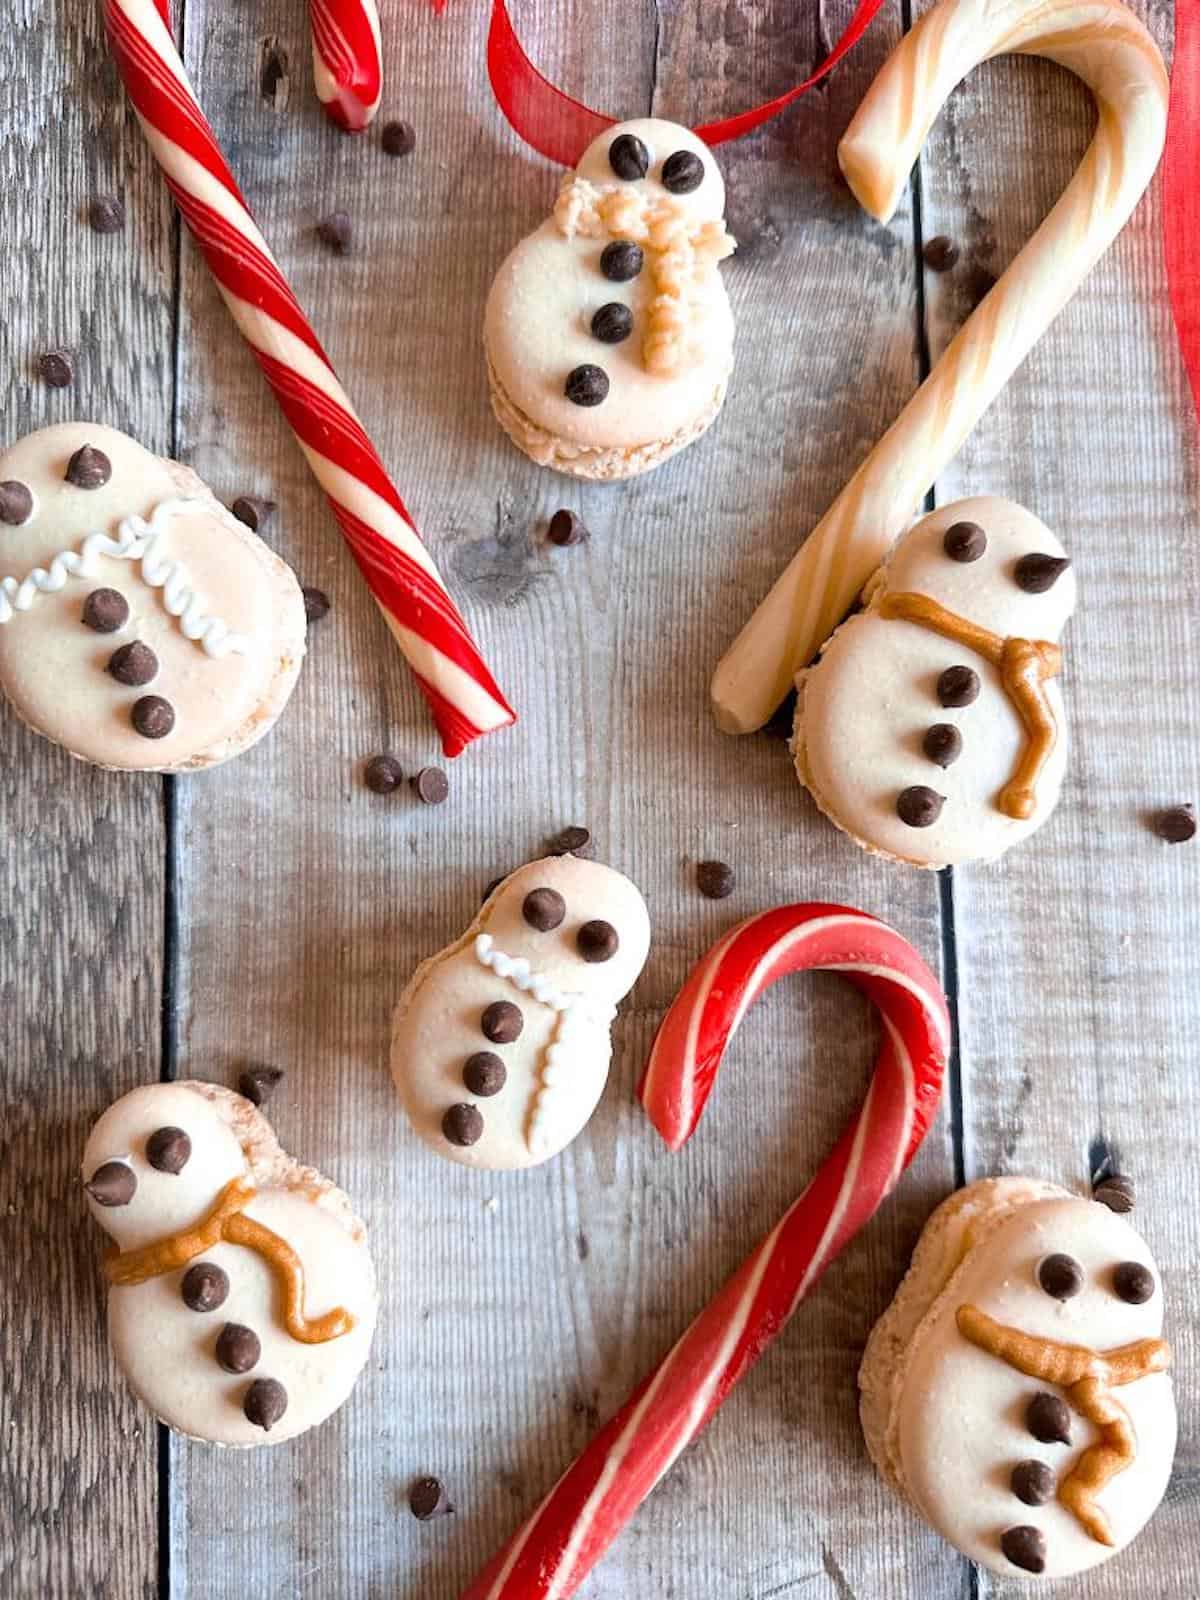 Snowman shaped macrons on a wooden table decorated with chocolate chips and icing, surrounded by candy canes. 